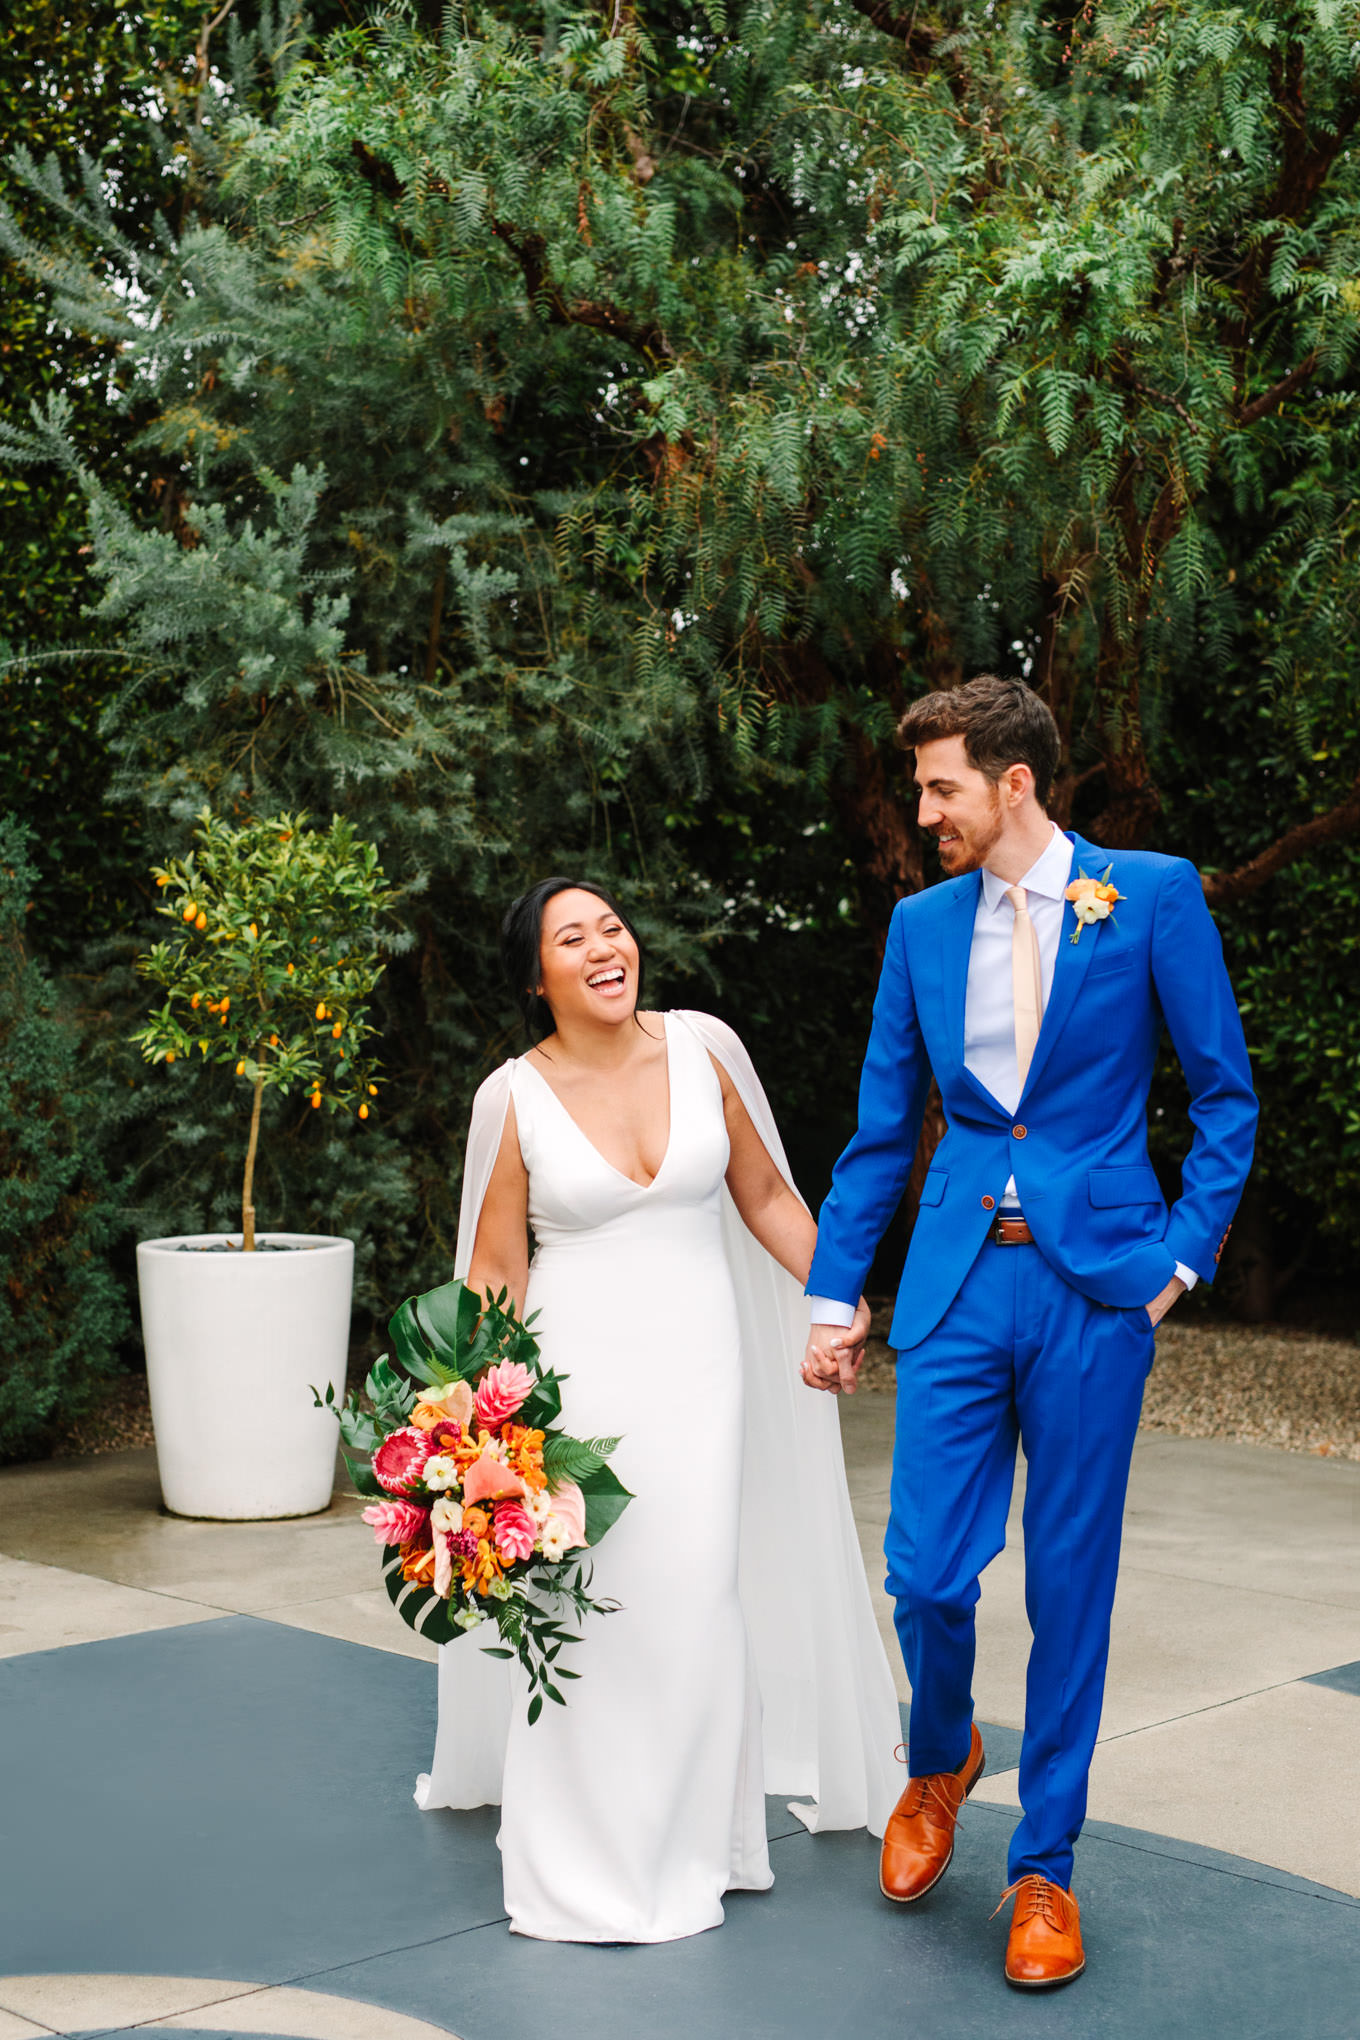 Bride and groom walking together | TV inspired wedding at The Fig House Los Angeles | Published on The Knot | Fresh and colorful photography for fun-loving couples in Southern California | #losangeleswedding #TVwedding #colorfulwedding #theknot   Source: Mary Costa Photography | Los Angeles wedding photographer